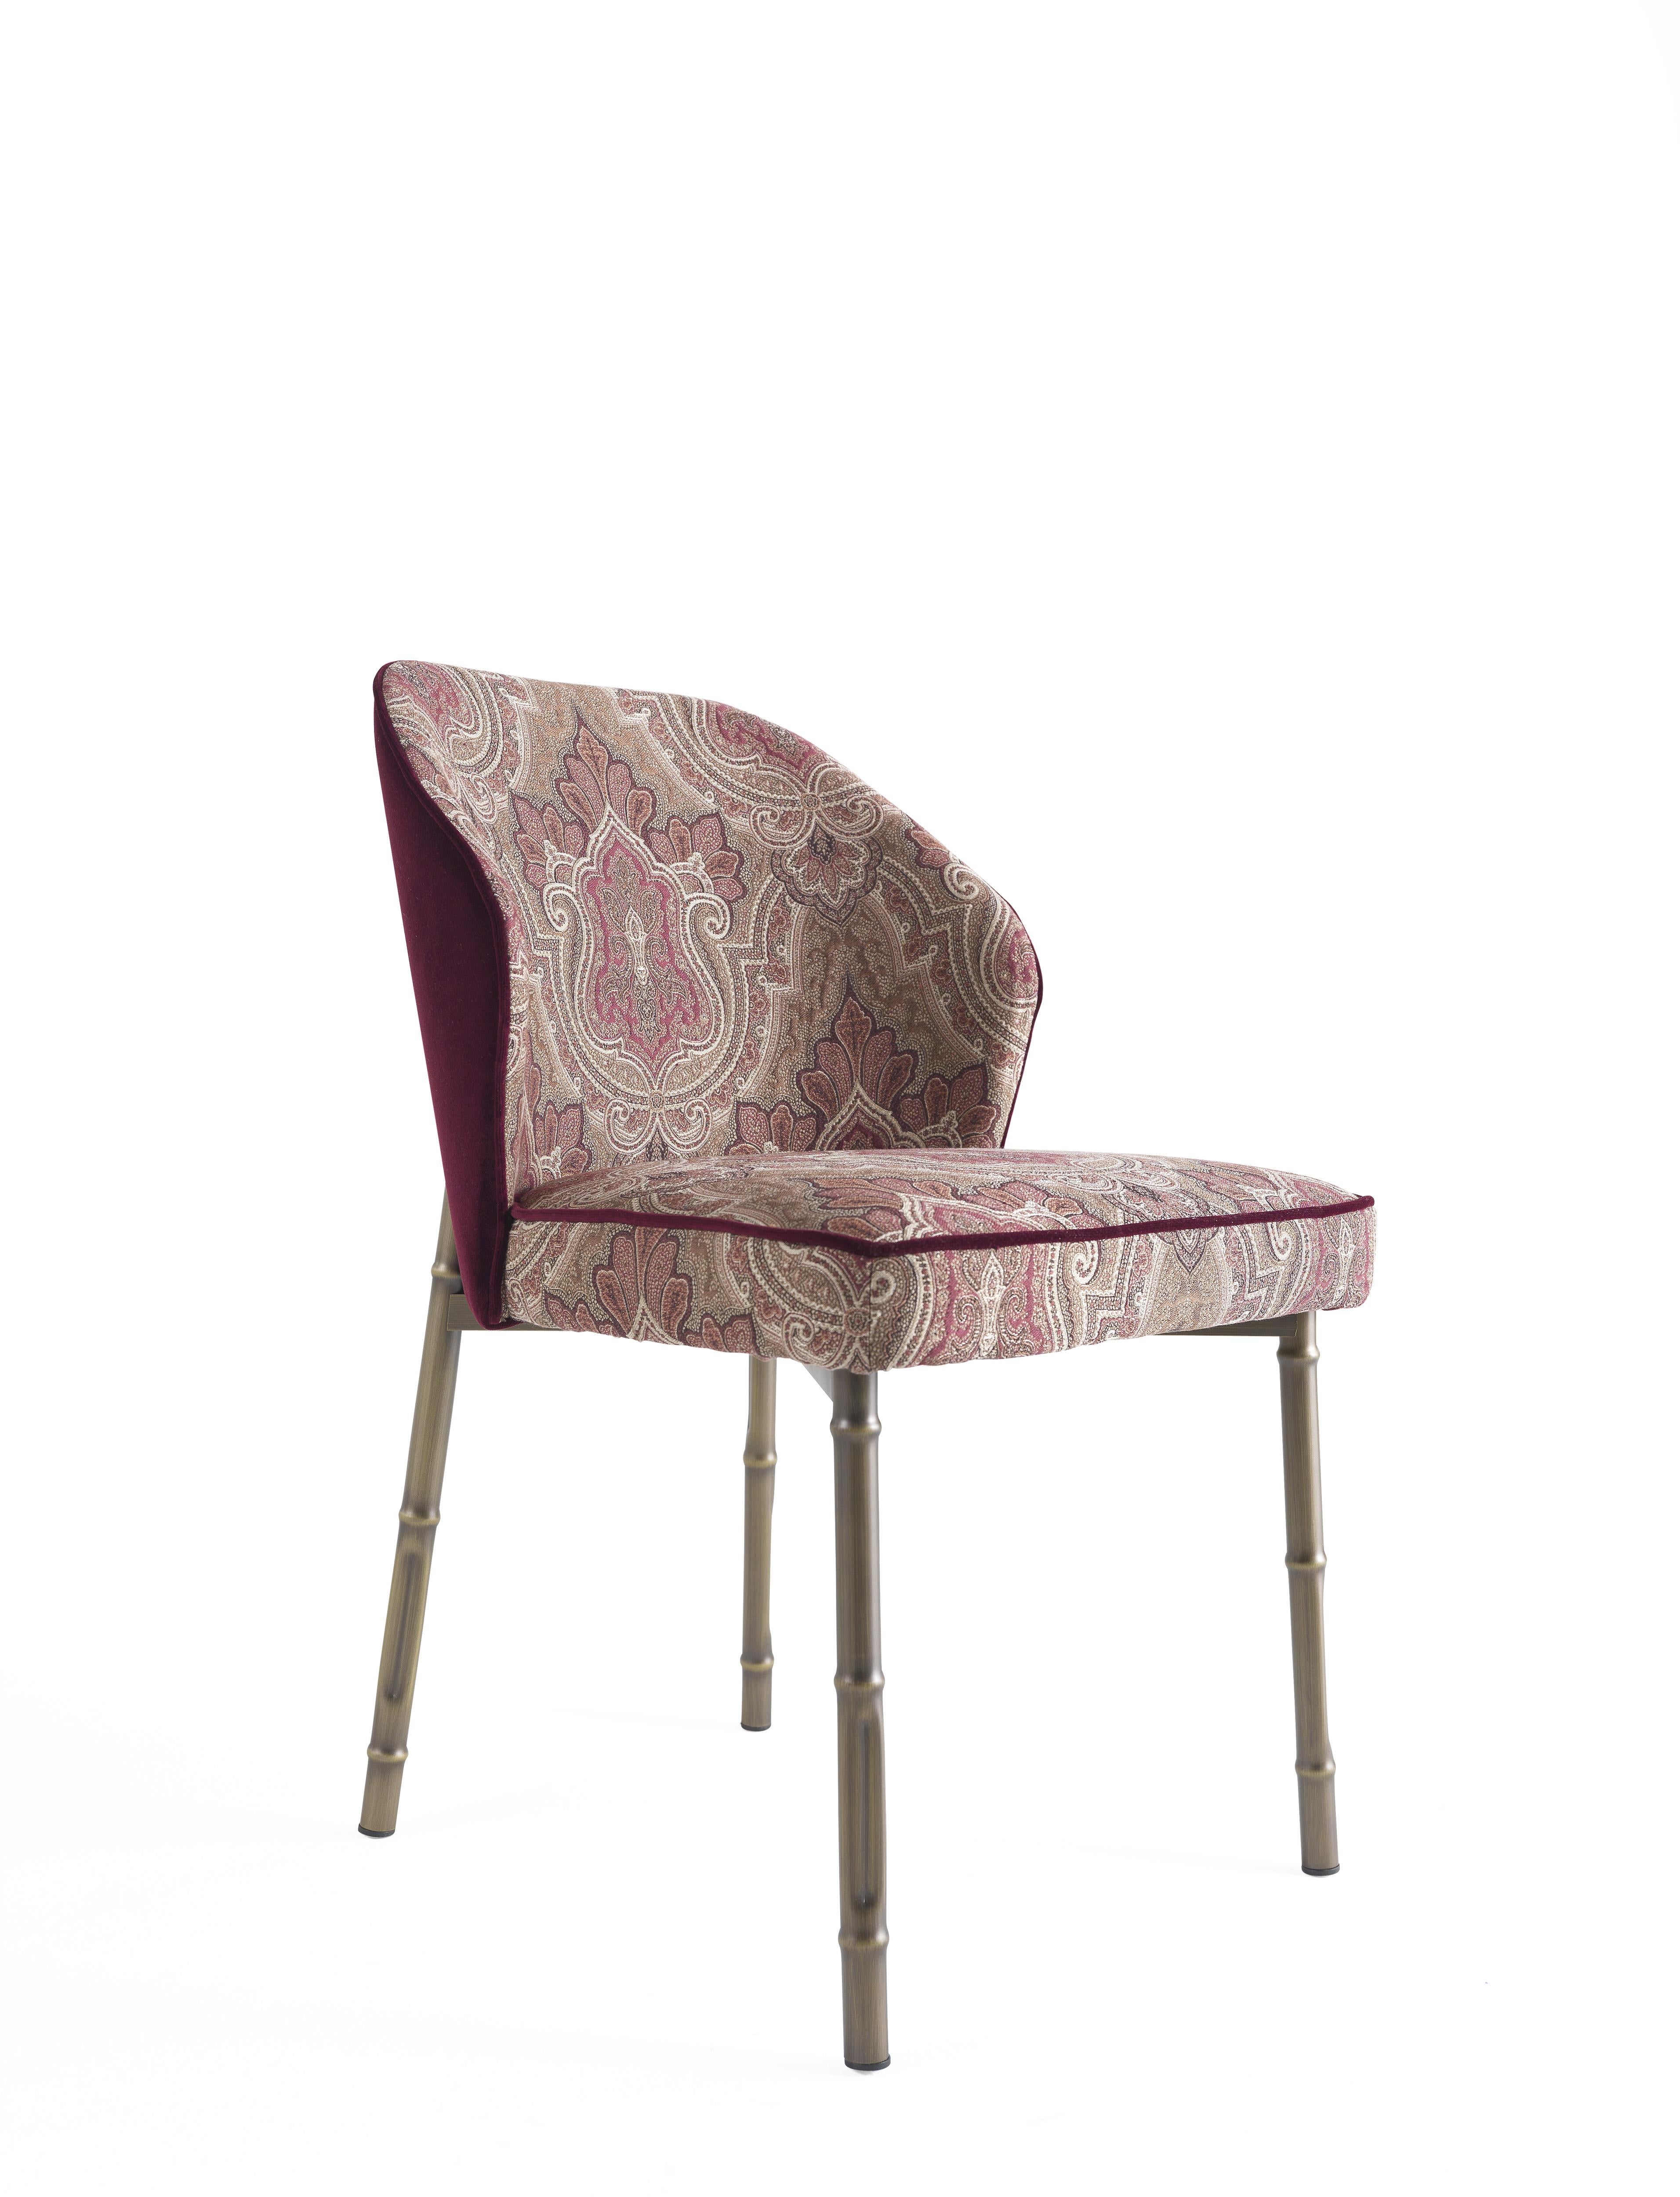 The rich Deosai cashmere of the seat, enhanced by the burgundy velvet piping that also features the back, meets the suggestions of the Asian nature, evoked by the bronzed finish legs with bamboo shape and by the precious monkey applied to the back,